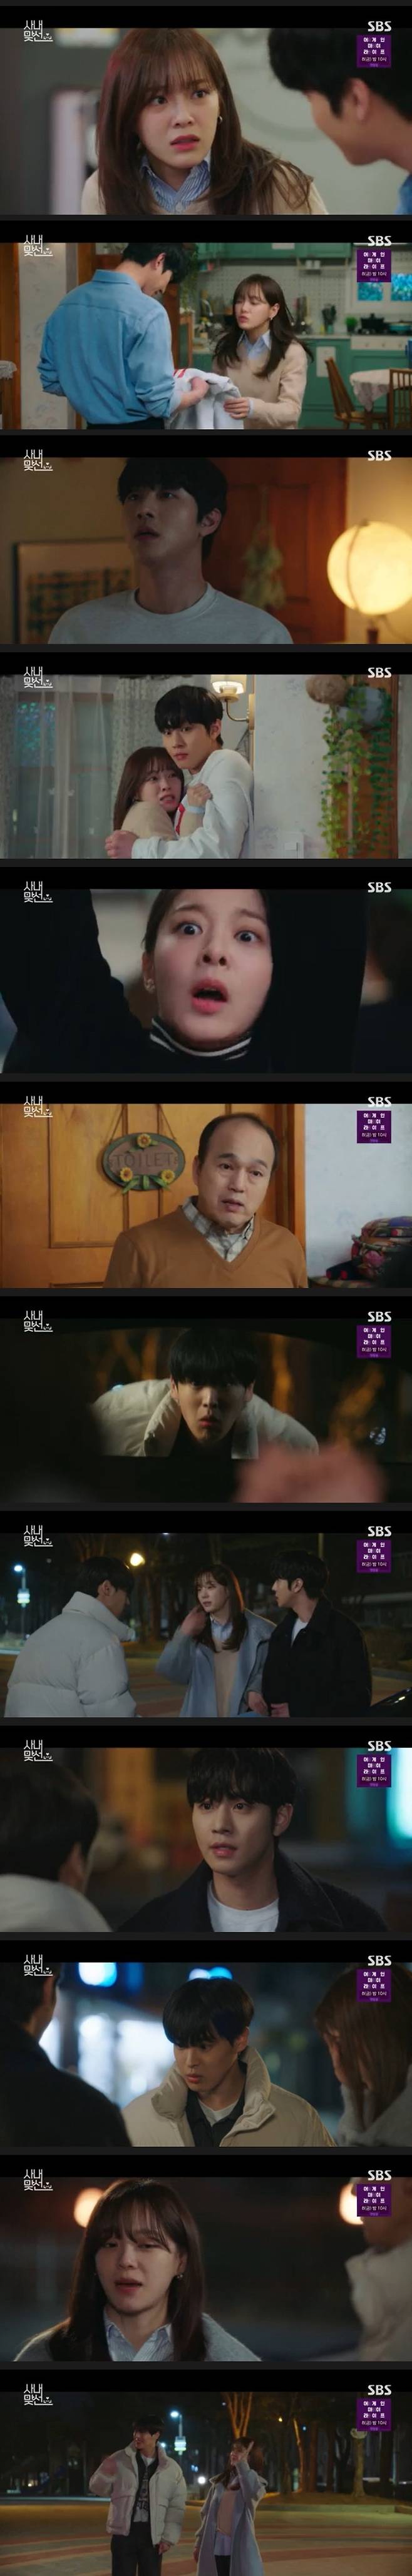 Seoul = = Choi Byung-chan, who is in the company, knew Ahn Hyo-seops identity.The SBS monthly drama Inside the Company (playplay by Han Sul-hee, PR and director Park Sun-ho) aired on the 29th showed Kang Tae-moo (An Hyo-seop), who sneaked out of Shin Ha-ris house, meeting Shin Ha-min (Choi Byung-chan), Shin Ha-ris younger brother.On this day, Chairman Kang Da-gu (Lee Duk-hwa) wondered what the woman who meets her grandson Kang Tae-moo is.He said, I have a woman to meet. After luck, he said, I heard everything, how long will you keep it secret?Who is hiding it, and (God) Geumhee is allowed because you like it. Kang Tae-moo said, I will introduce you soon, he said. Please believe me and wait.Kang Tae-moo, Chung Hoon (Kim Min-kyu), and Jinyoung Seo (Sul In-ah) helped serve Shin Ha-ris Chicken house. The two couples spent a sweet time serving.Shinhari poured coke into Kang Tae-moos clothes and the two went into the house to change clothes.However, Shin Ha-ris parents, Shin Jung-hae (Kim Kwang-gyu) and Han Mi-mo (Jung Young-joo), who went to the shopping mall, returned home earlier than expected.In response, Jinyoung sent a warning sign outside the door, shouting, (God) Hariya Mom is here.Shinhari hid Kang Tae-moo in the room, and Kang Tae-moo looked around the room of Shinhari and smiled quietly.While Jinyoungseo and Cha Sung Hoon had their eyes on him, Kang Tae-moo and Shin Ha-ri sneaked out of the house, and Kang Tae-moo bitterly said, I want to keep it (between us) secret until now.Outside the house, the two accidentally met Sin Ha-ris younger brother, Sin Ha-min (Choi Byung-chan).Shin Ha-min saw Kang Tae-moo wearing his clothes and raised his voice saying, Do you meet my sister, Baeksu?Kang Tae-moo could not stand it and introduced himself as (Shin) Haris boyfriend and GO Food representative Kang Tae-moo.Shin Ha-min was very embarrassed and said, Why do you meet my sister? He said, Are you caught or threatened?Then, he said, I am a brother-in-law. Kang Tae-moo also liked it, saying, If you like it, buy a suit and give it to your brother-in-law.Shin Ha-ri and Shin Ha-min, who are left alone, said, How did the two of you meet? He asked, If you keep the store empty, I will keep the secret of the brother-in-law.I do not think my house will be a match in a house like a chaebol, he said innocently, I will not be able to coma even if I sell a house.In-house is an office romance of a face-genius talent man and a mischievous employee who deceives the identity. It is broadcast every Monday and Tuesday at 10 pm.